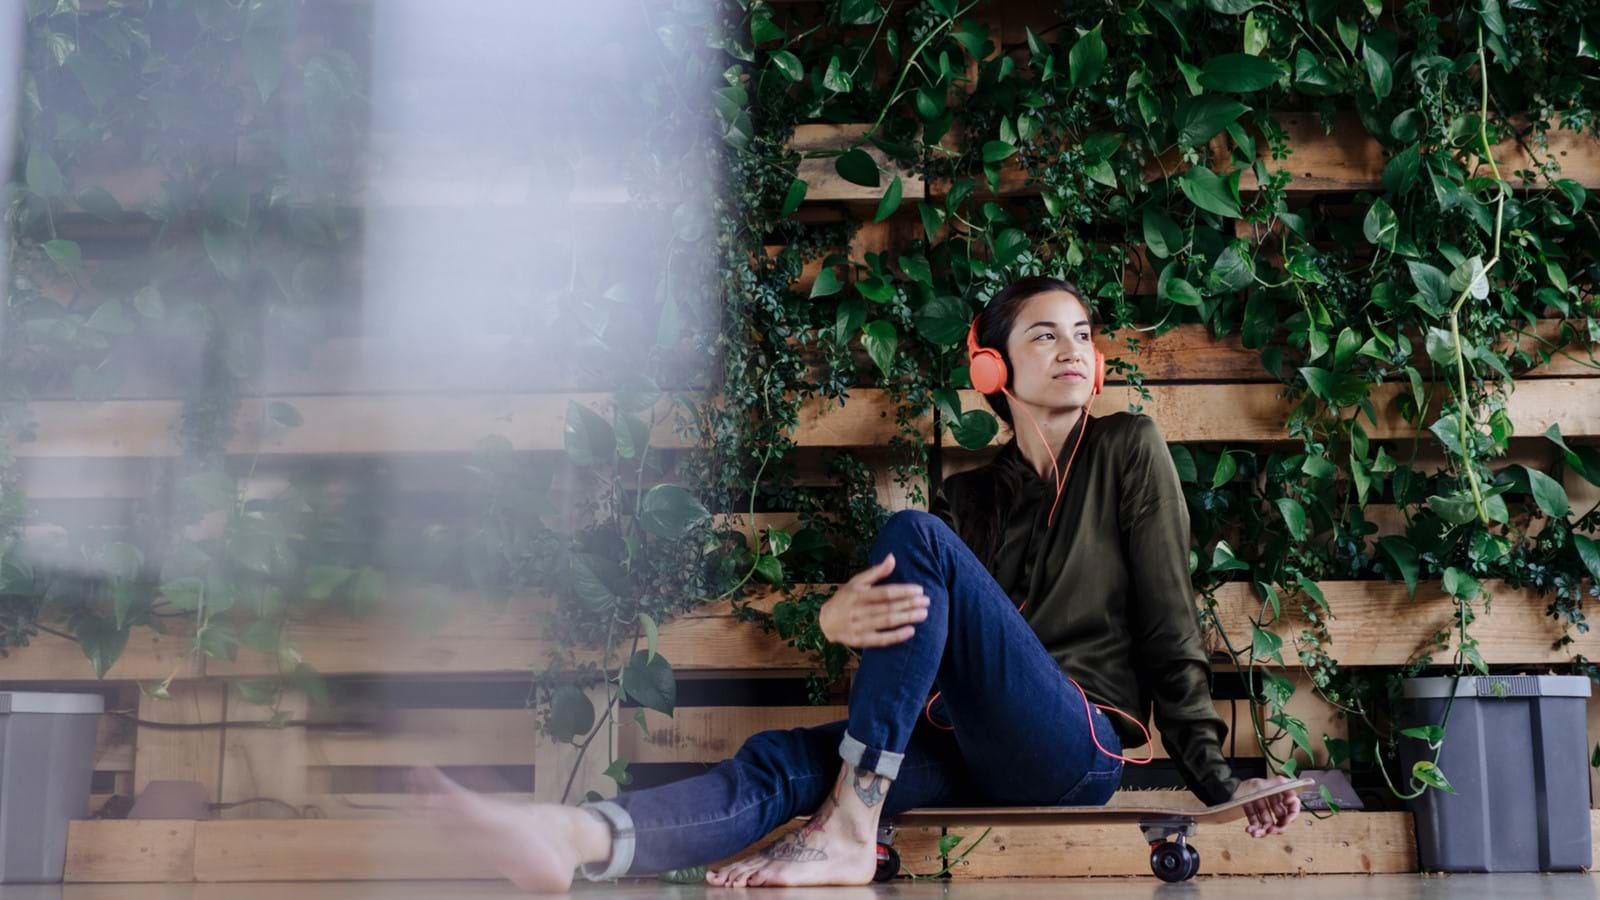 Lady sitting on her skateboard whilst listening to music, surrounded by green leaves and plants